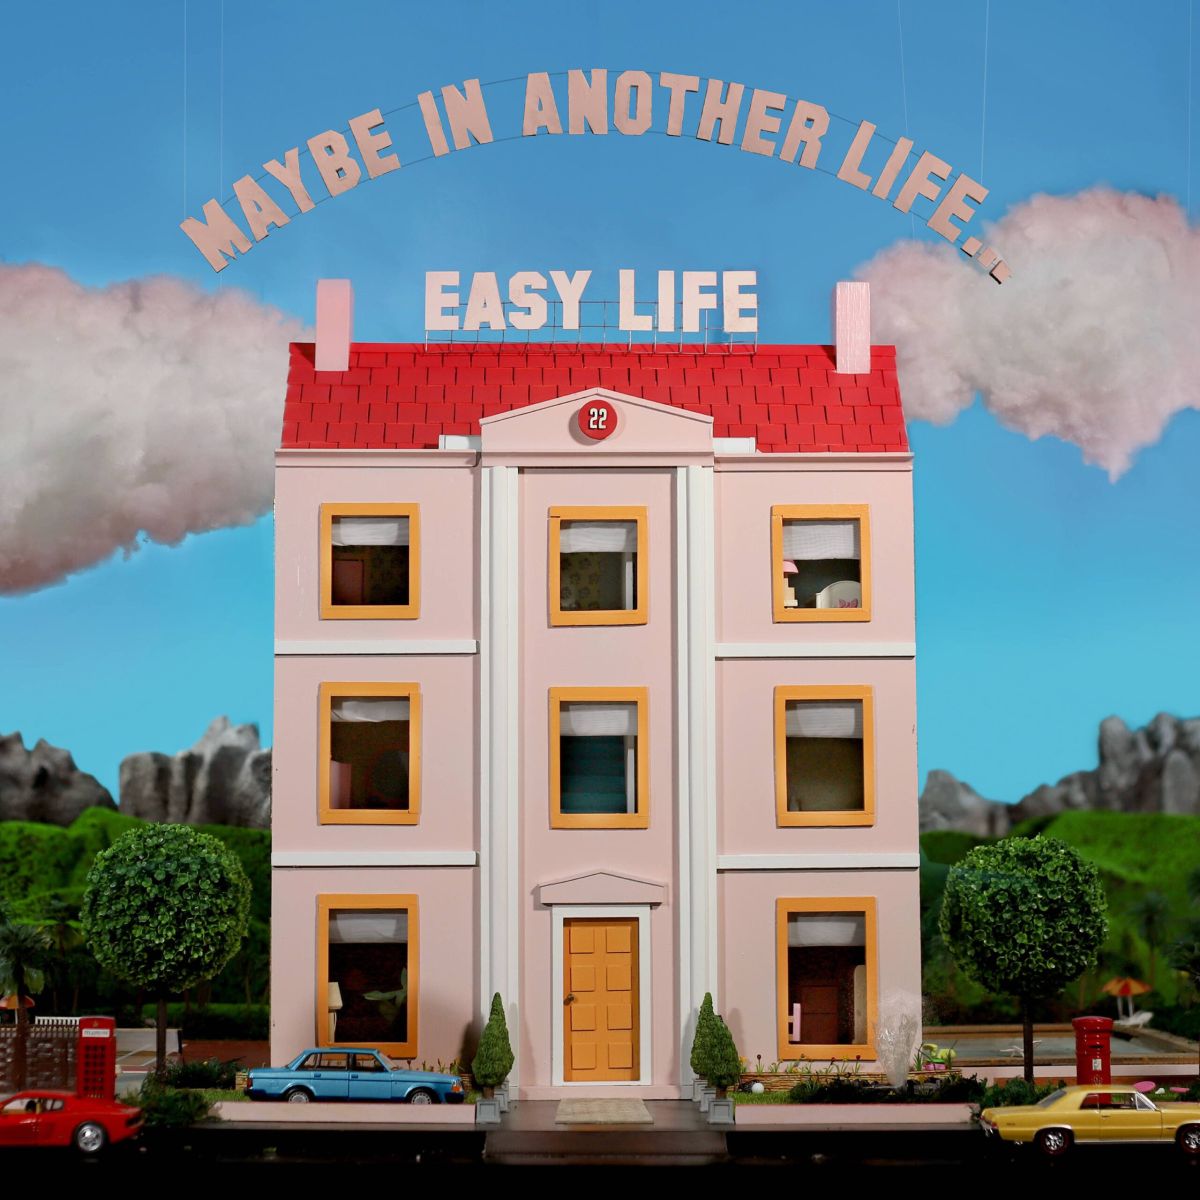 Album review: easy life’s MAYBE IN ANOTHER LIFE… feels mediocre and muddled